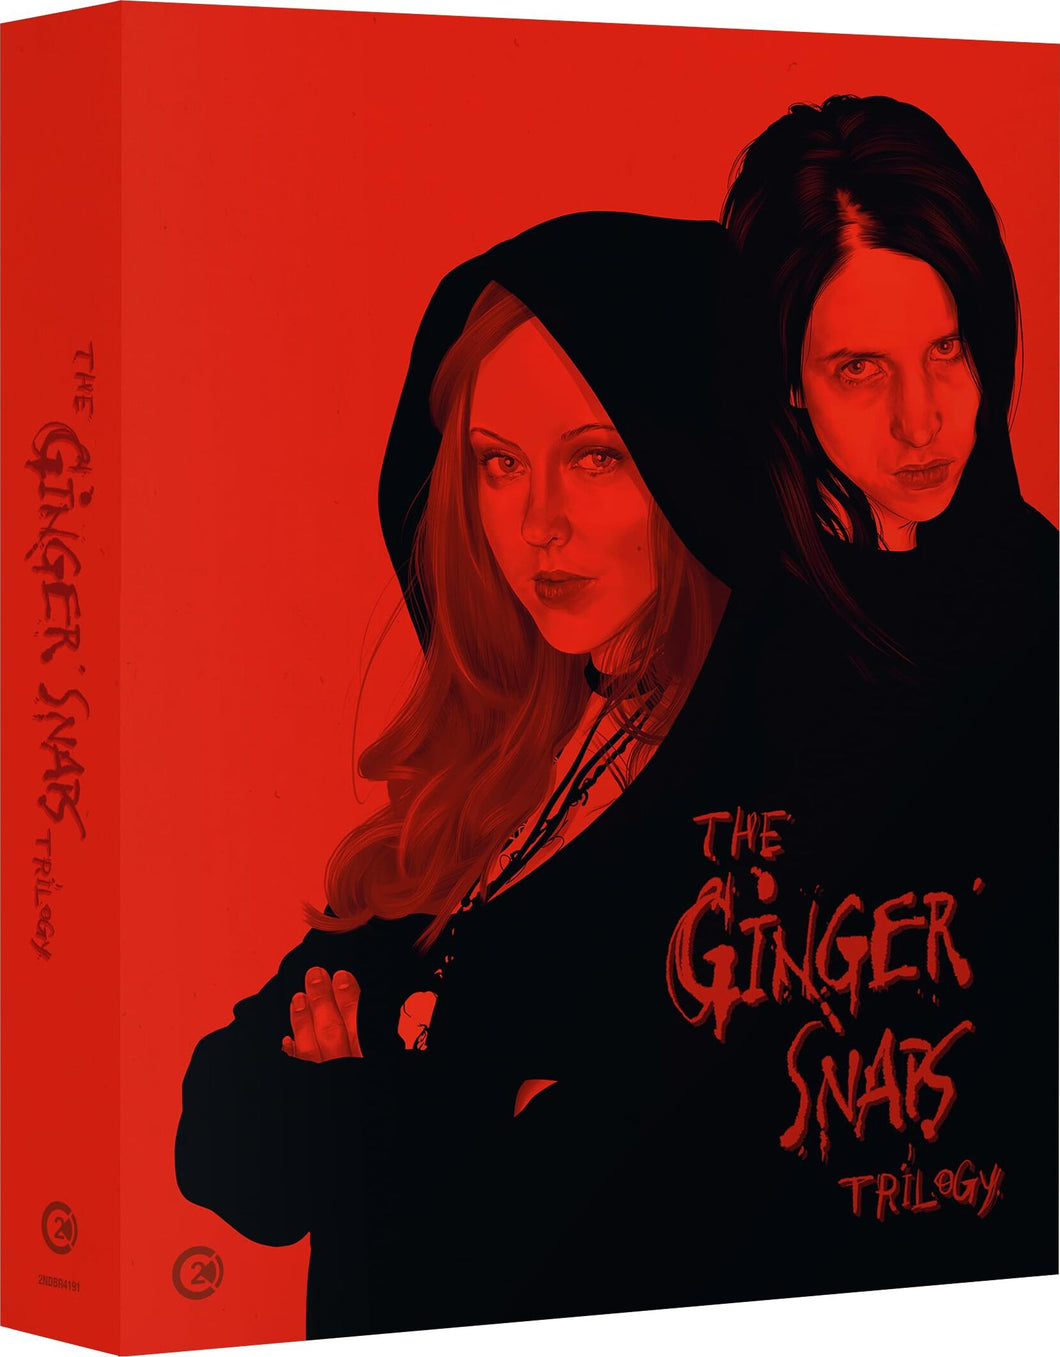 The Ginger Snaps Trilogy Limited Edition (2000-2004) - front cover